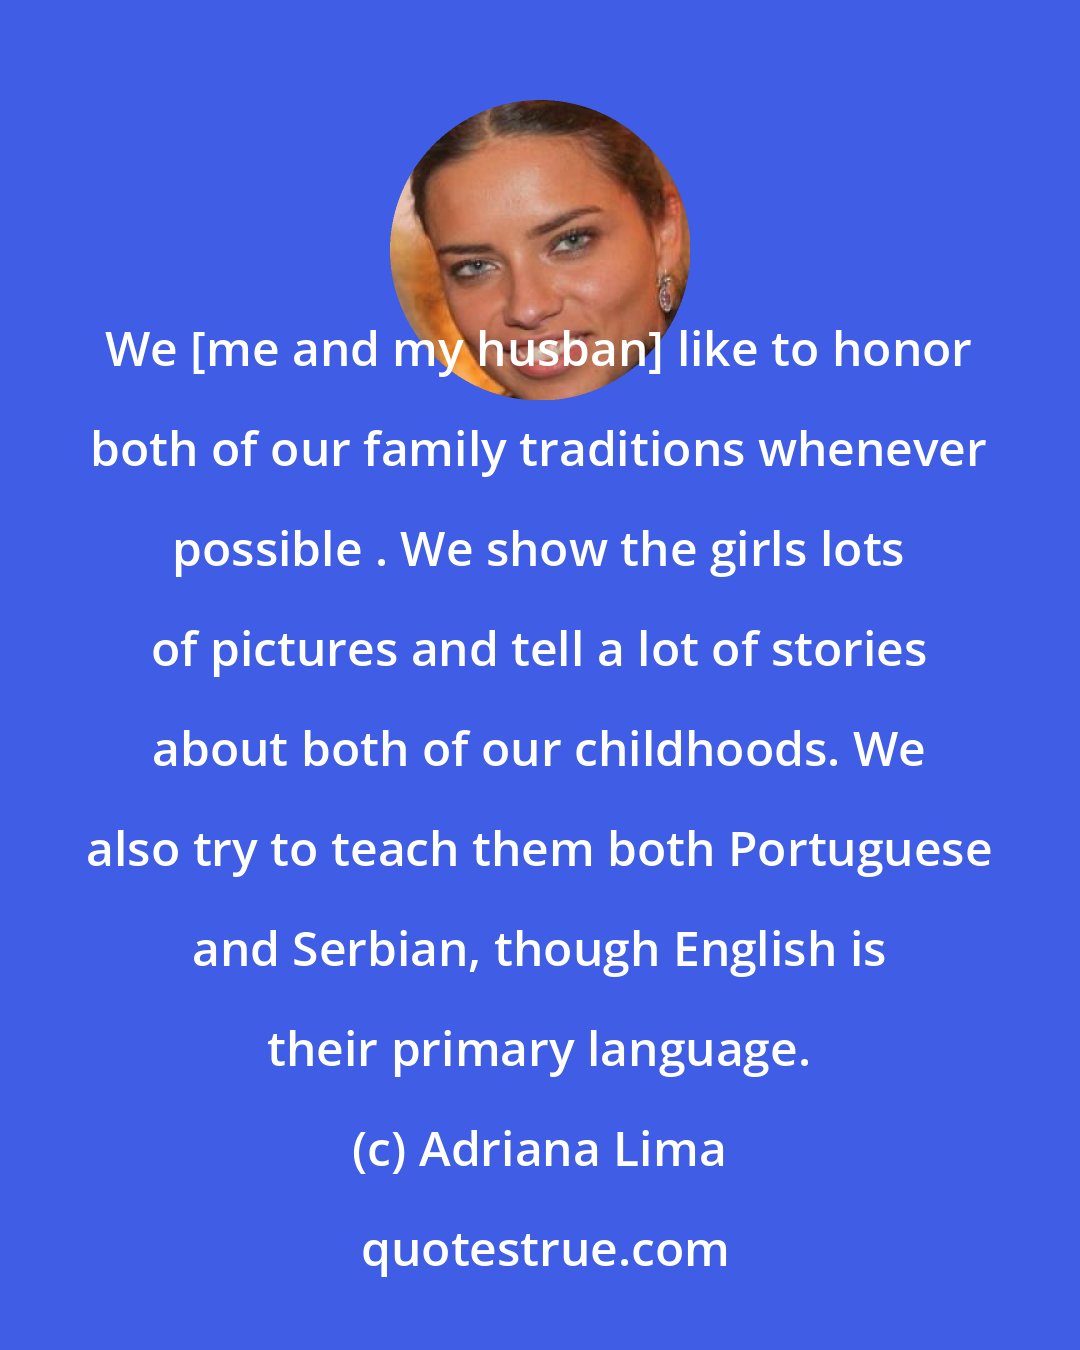 Adriana Lima: We [me and my husban] like to honor both of our family traditions whenever possible . We show the girls lots of pictures and tell a lot of stories about both of our childhoods. We also try to teach them both Portuguese and Serbian, though English is their primary language.